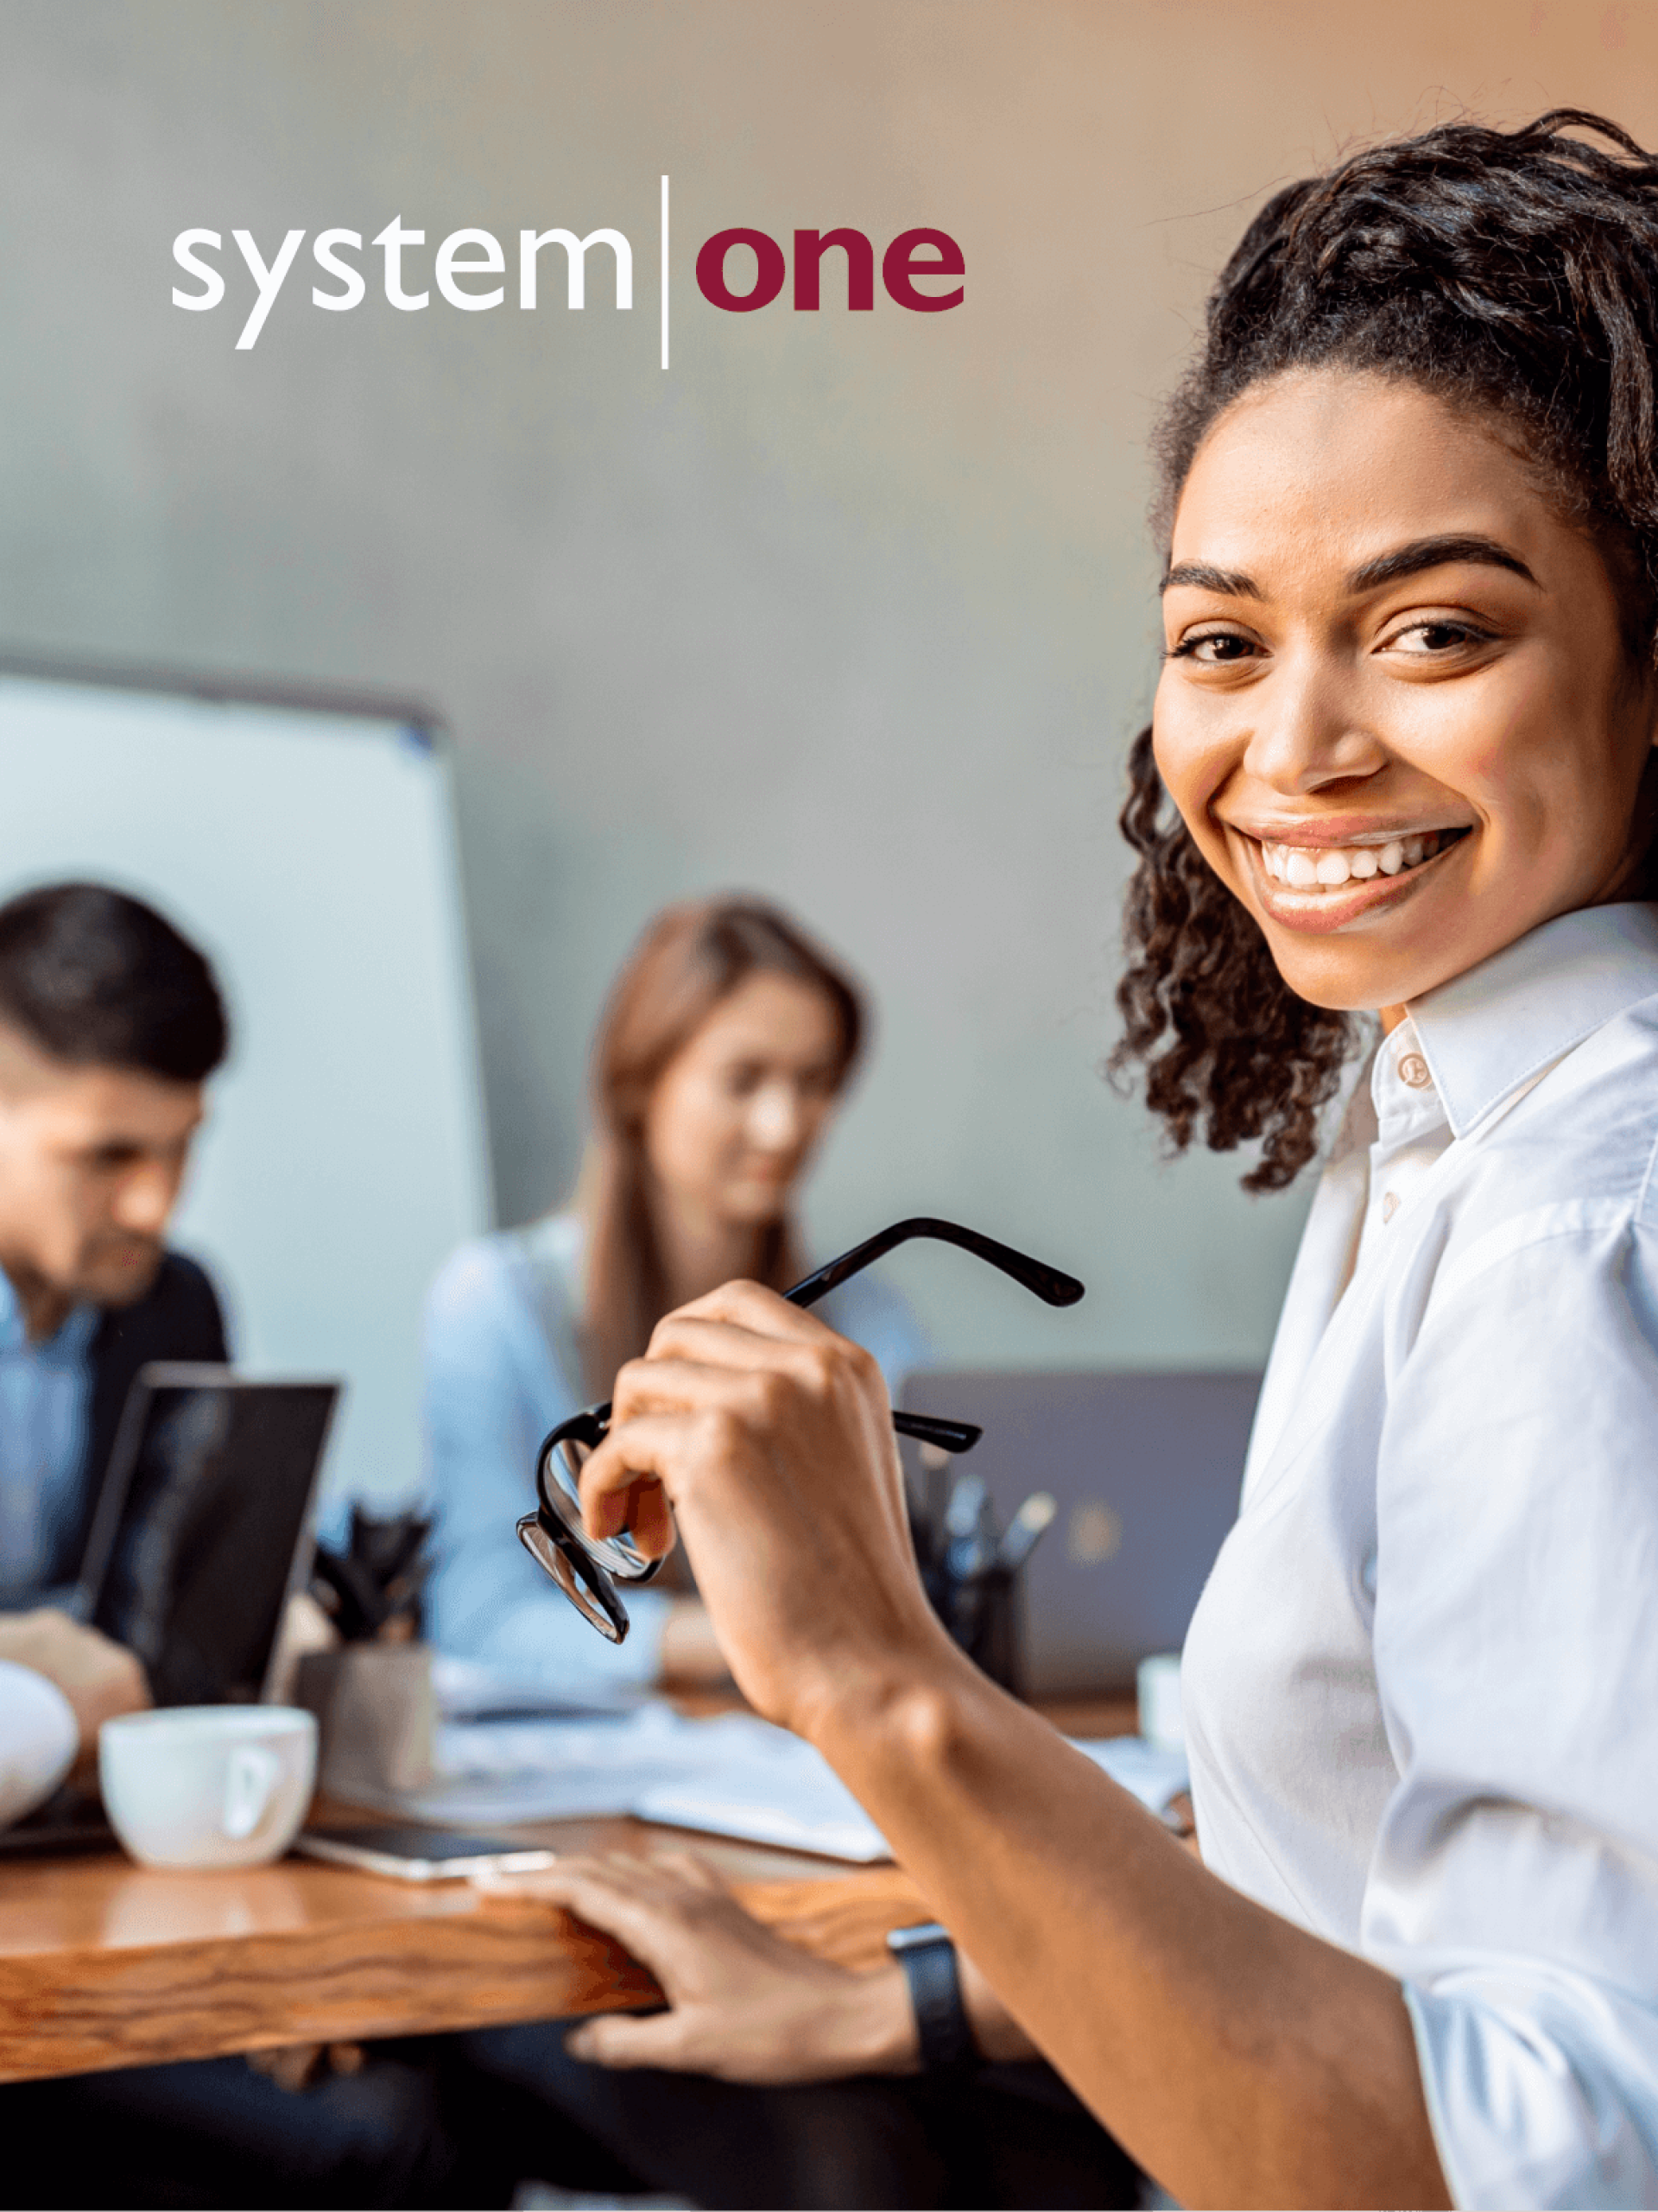 System One logo on image of smiling woman